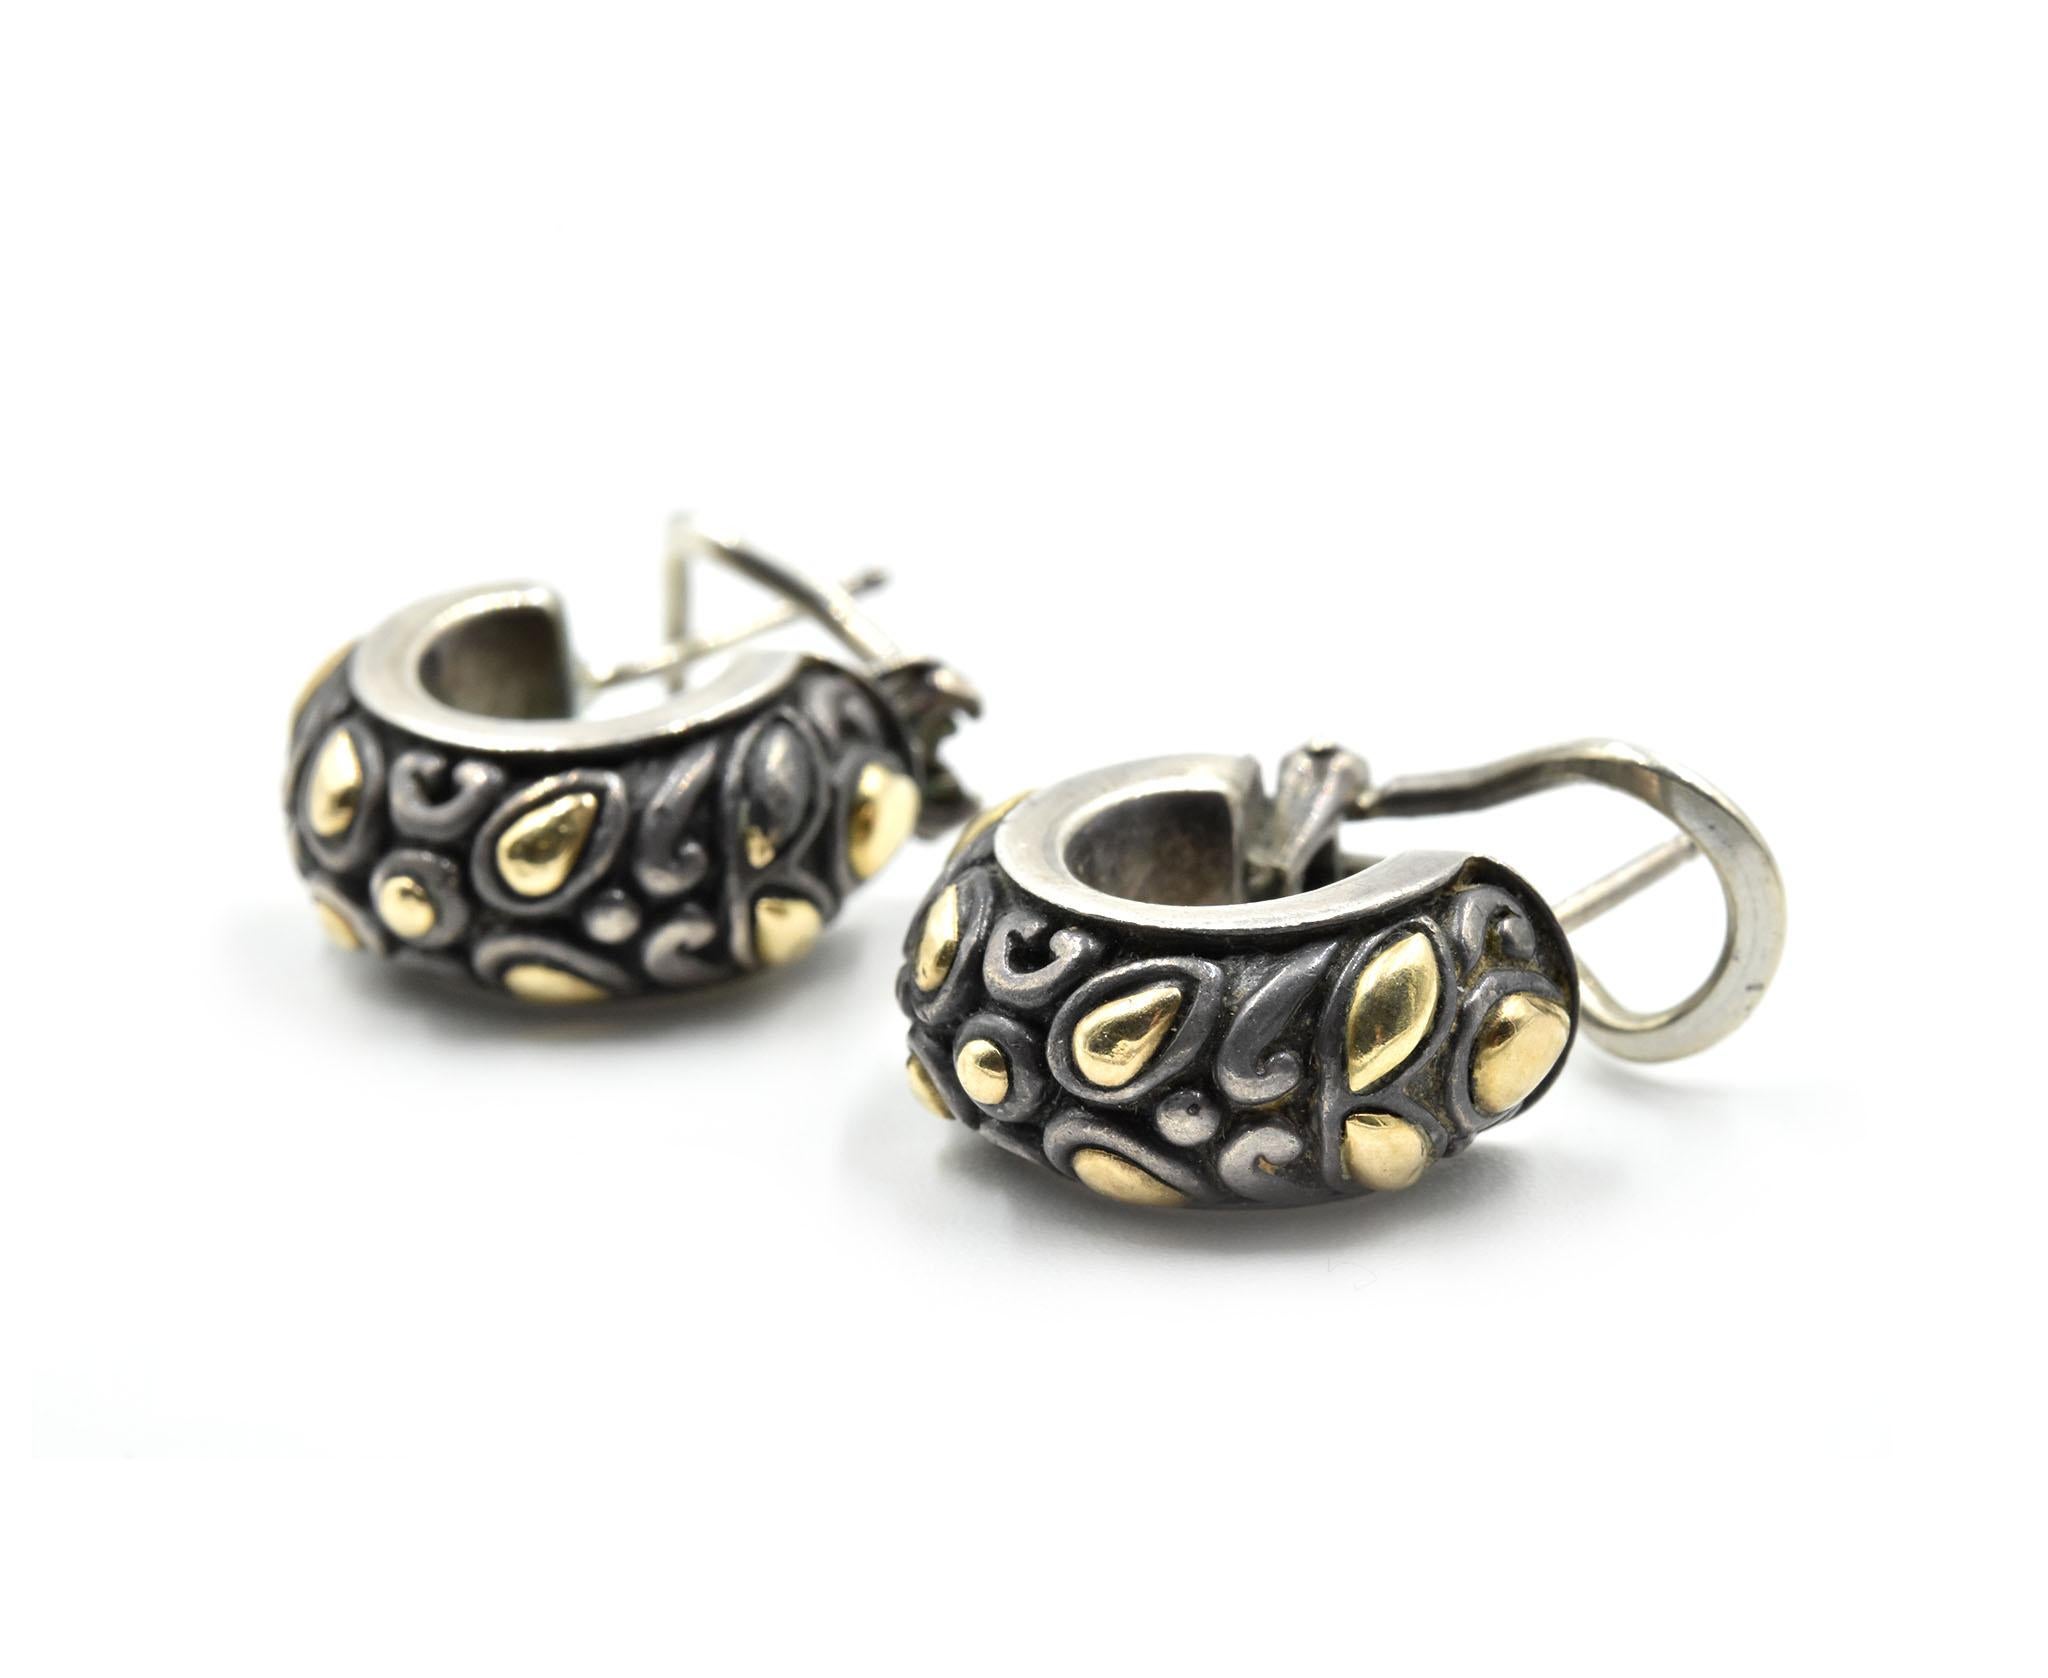 Designer: John Hardy
Collection: Kawung Collection
Material: sterling silver and 18k yellow gold
Fastening: omega backs
Dimensions: each earring measures 3/4-inches long and 1/4-inches wide
Weight: 12.36 grams
Retail: $500
